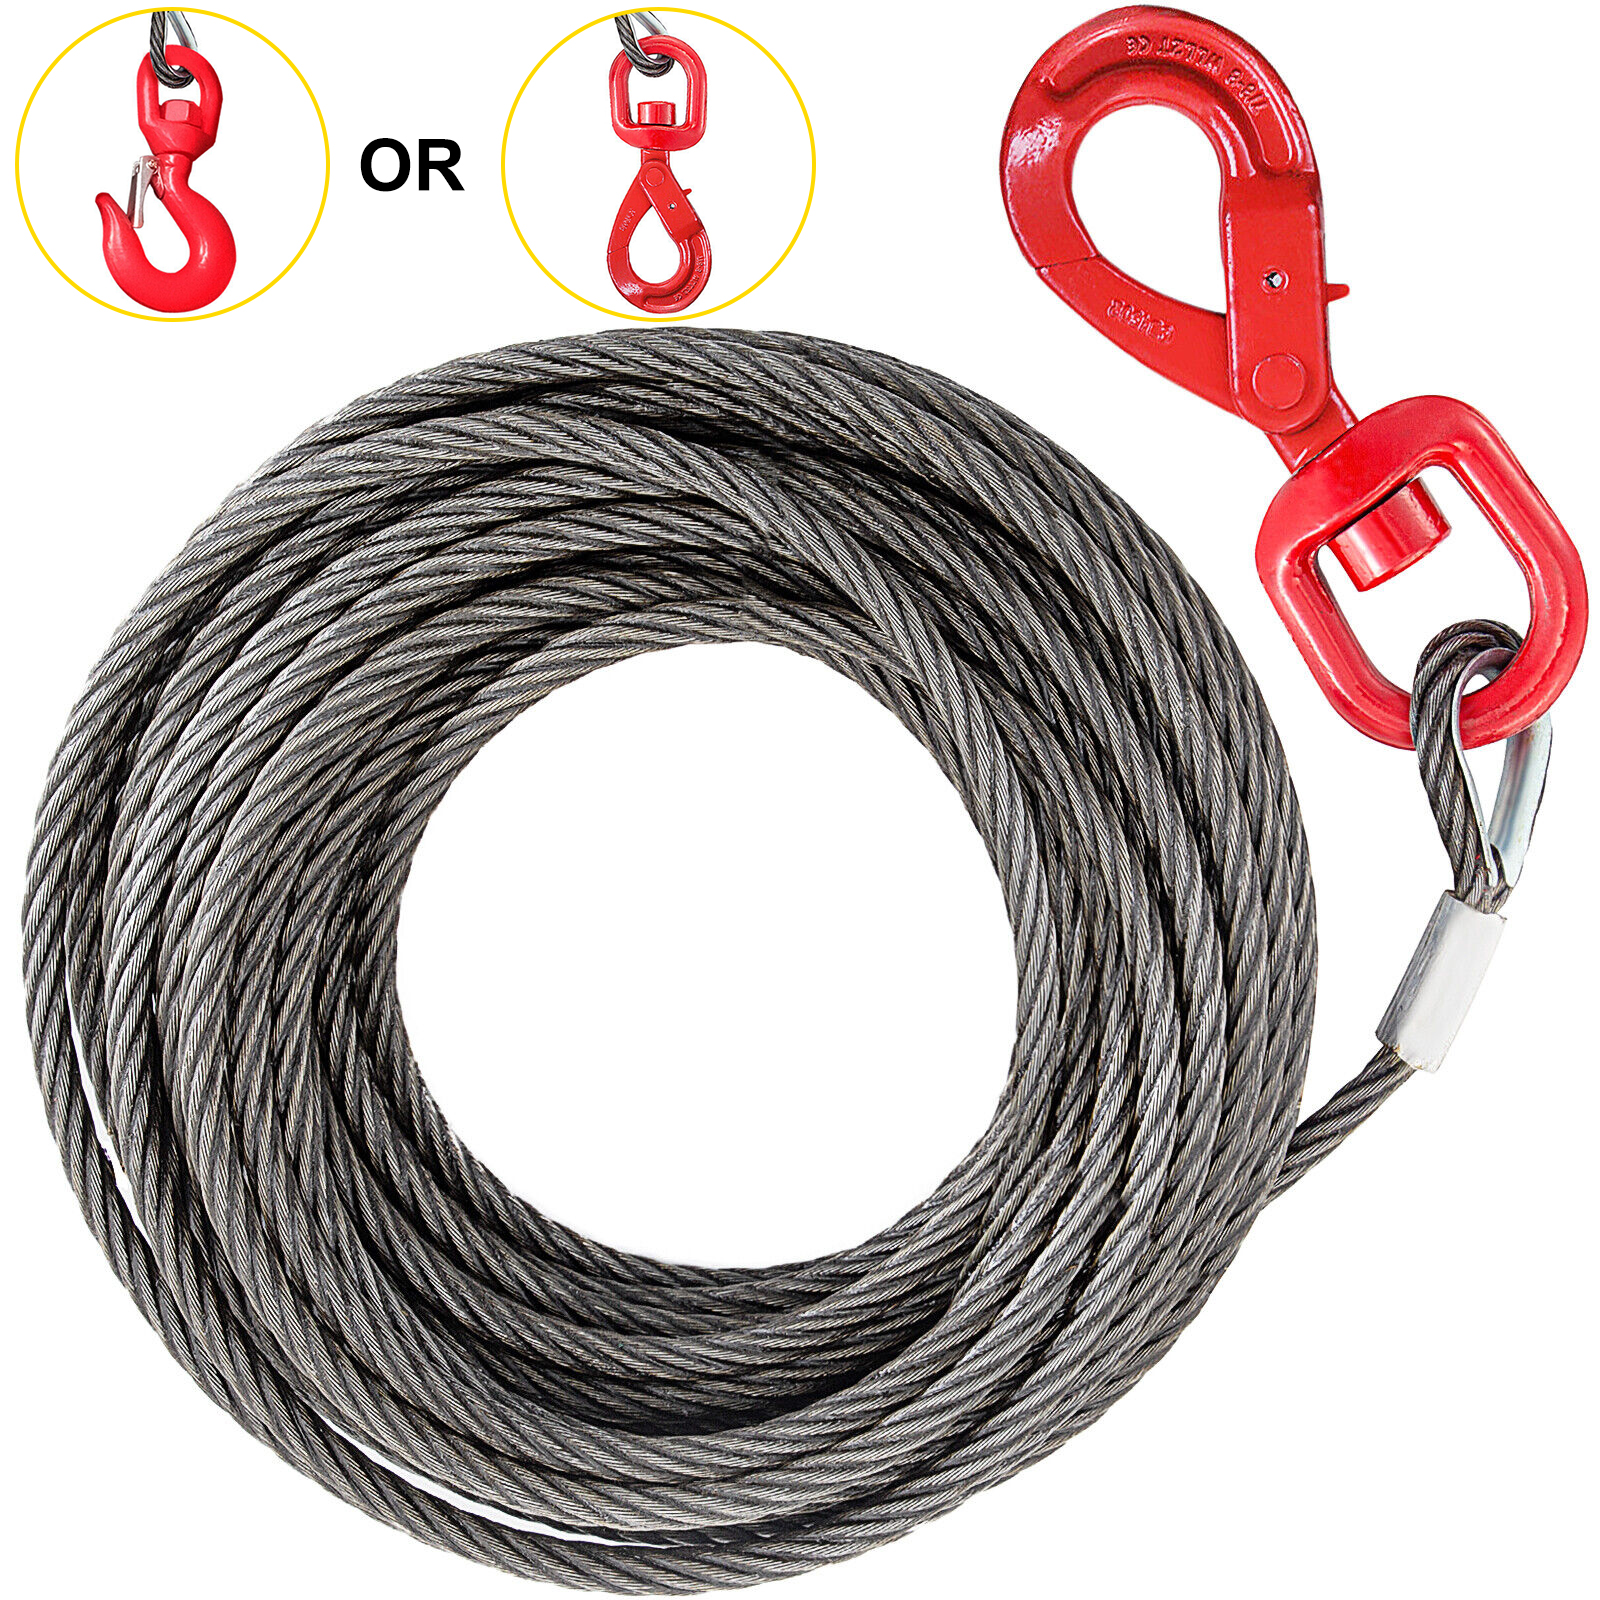 50'x3/8" Fiber Core Winch Cable Self Locking Swivel Hook Tow Truck Local Wire от Vevor Many GEOs